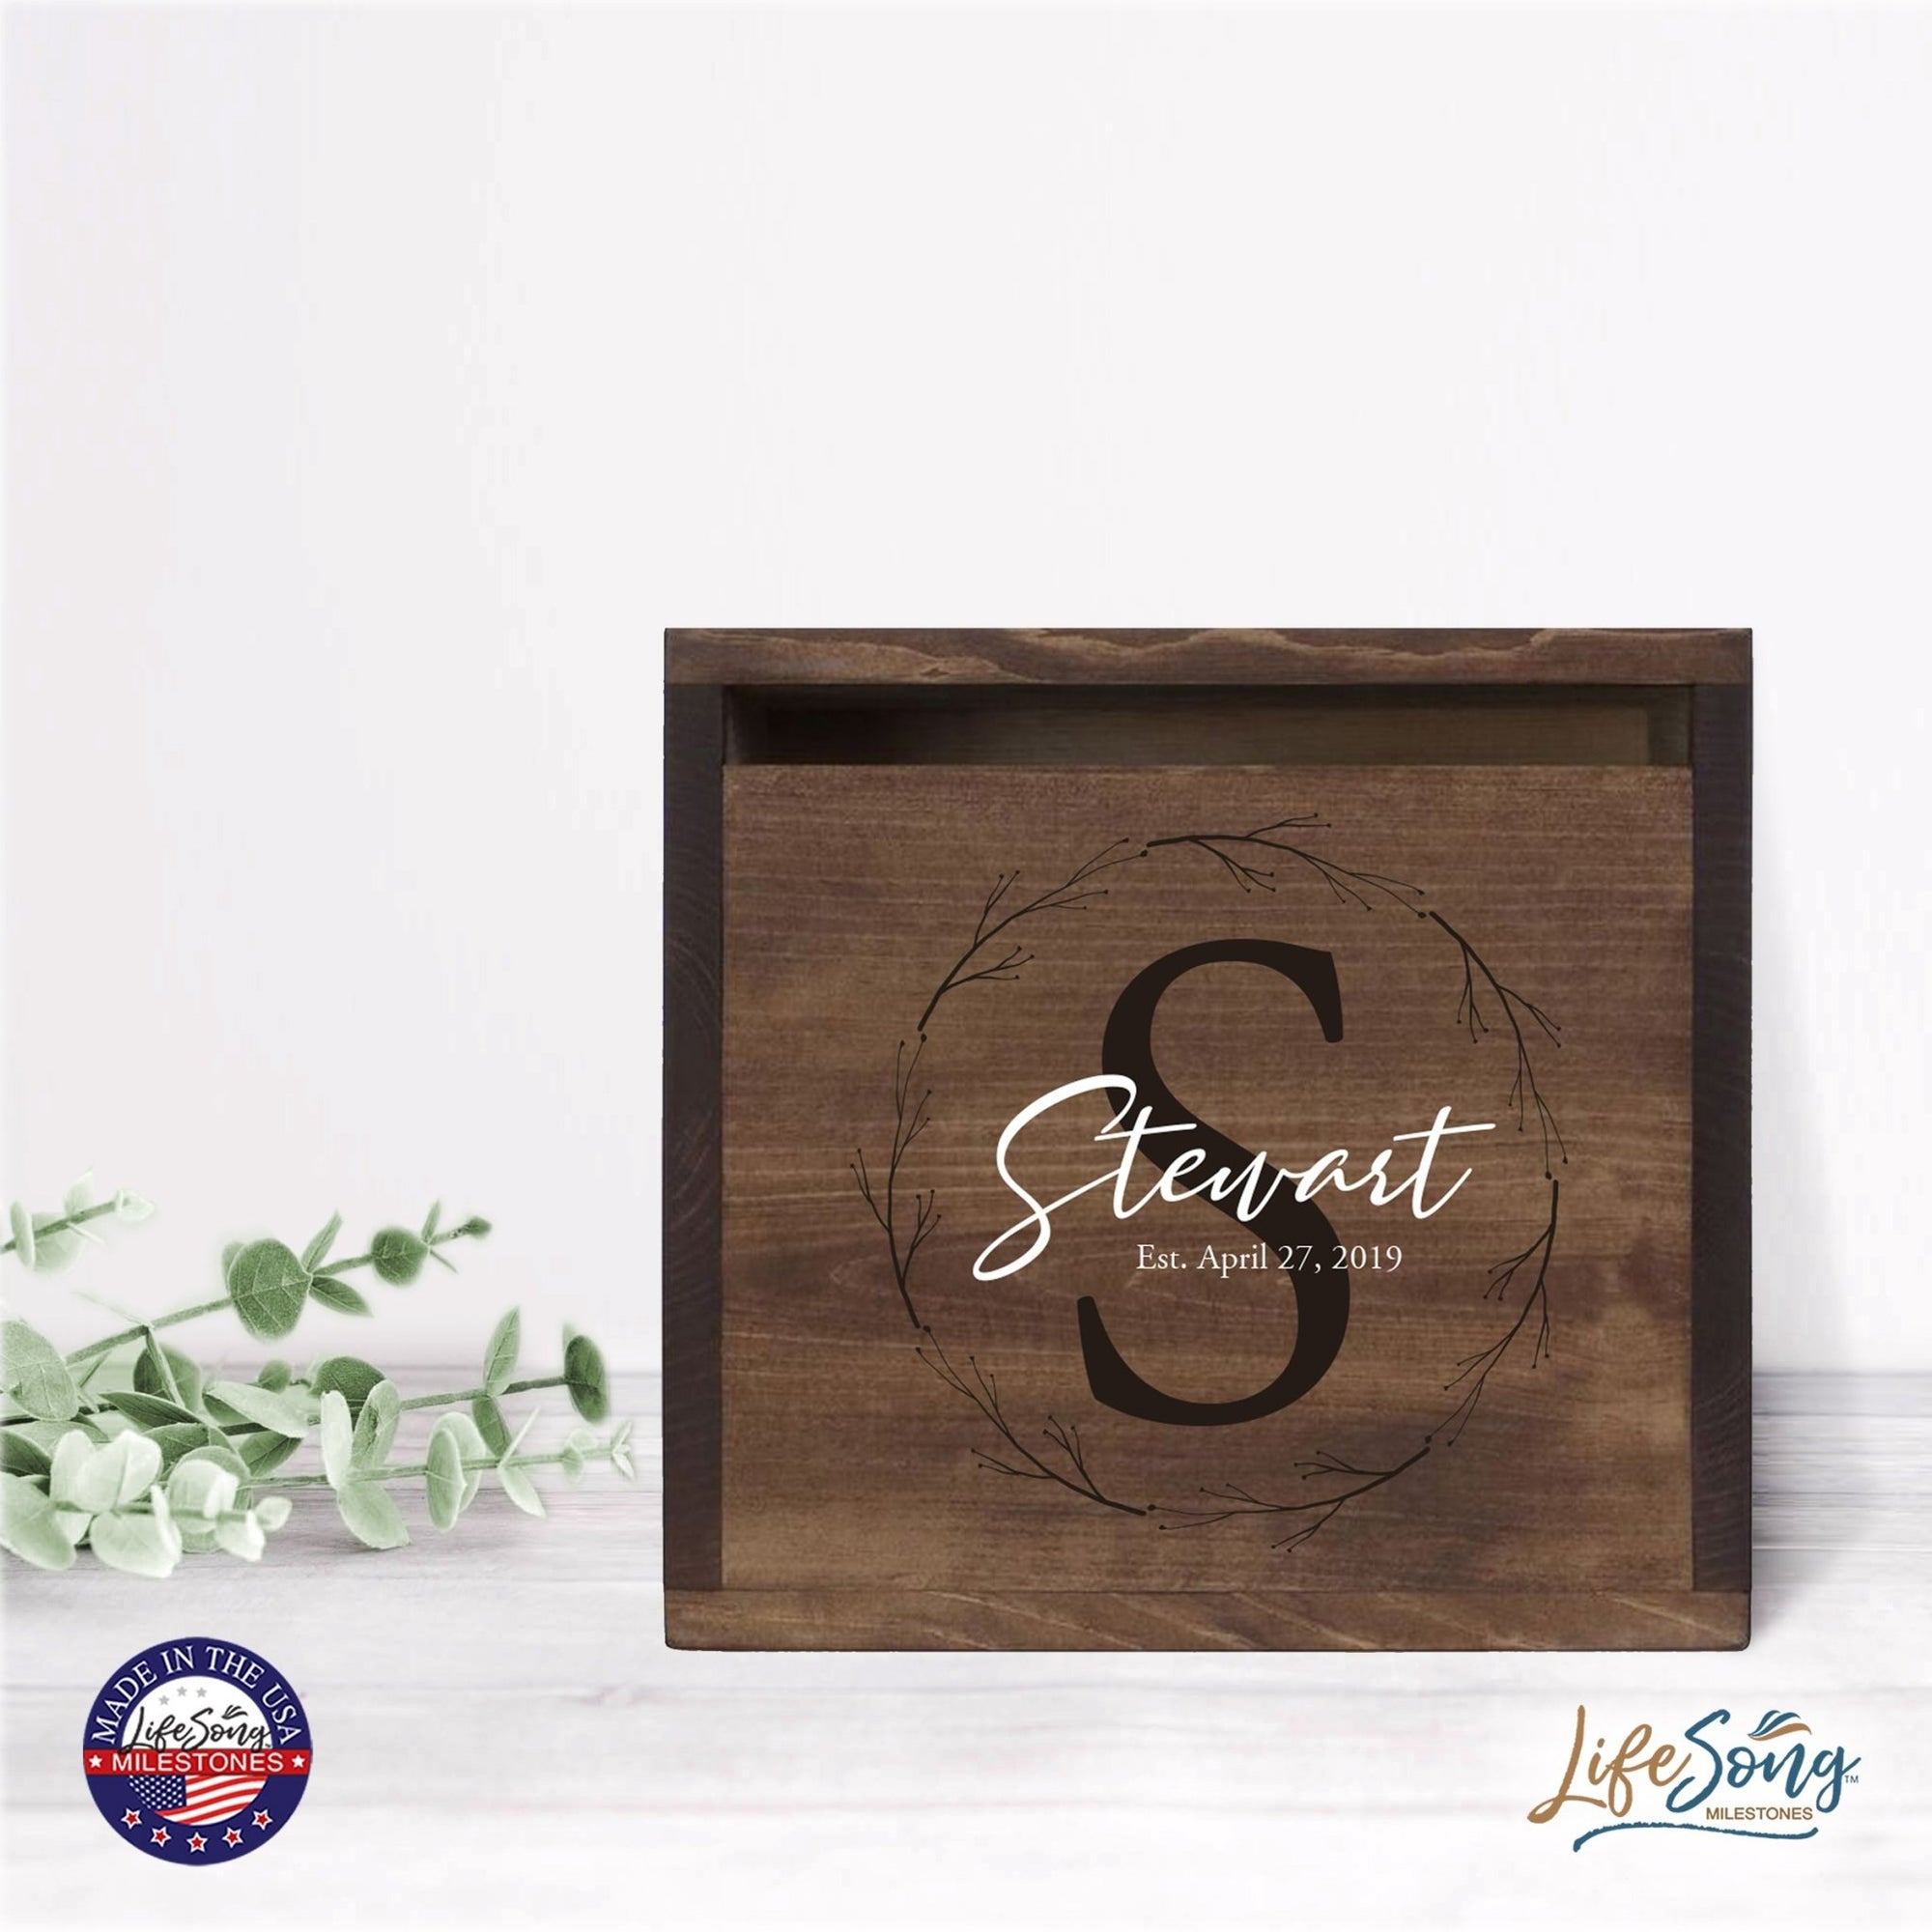 Personalized Wooden Card Box for Wedding Ceremonies, Venues, Receptions, Bridal Showers, and Engagement Parties 13.5x12 - Stewart (S) - LifeSong Milestones